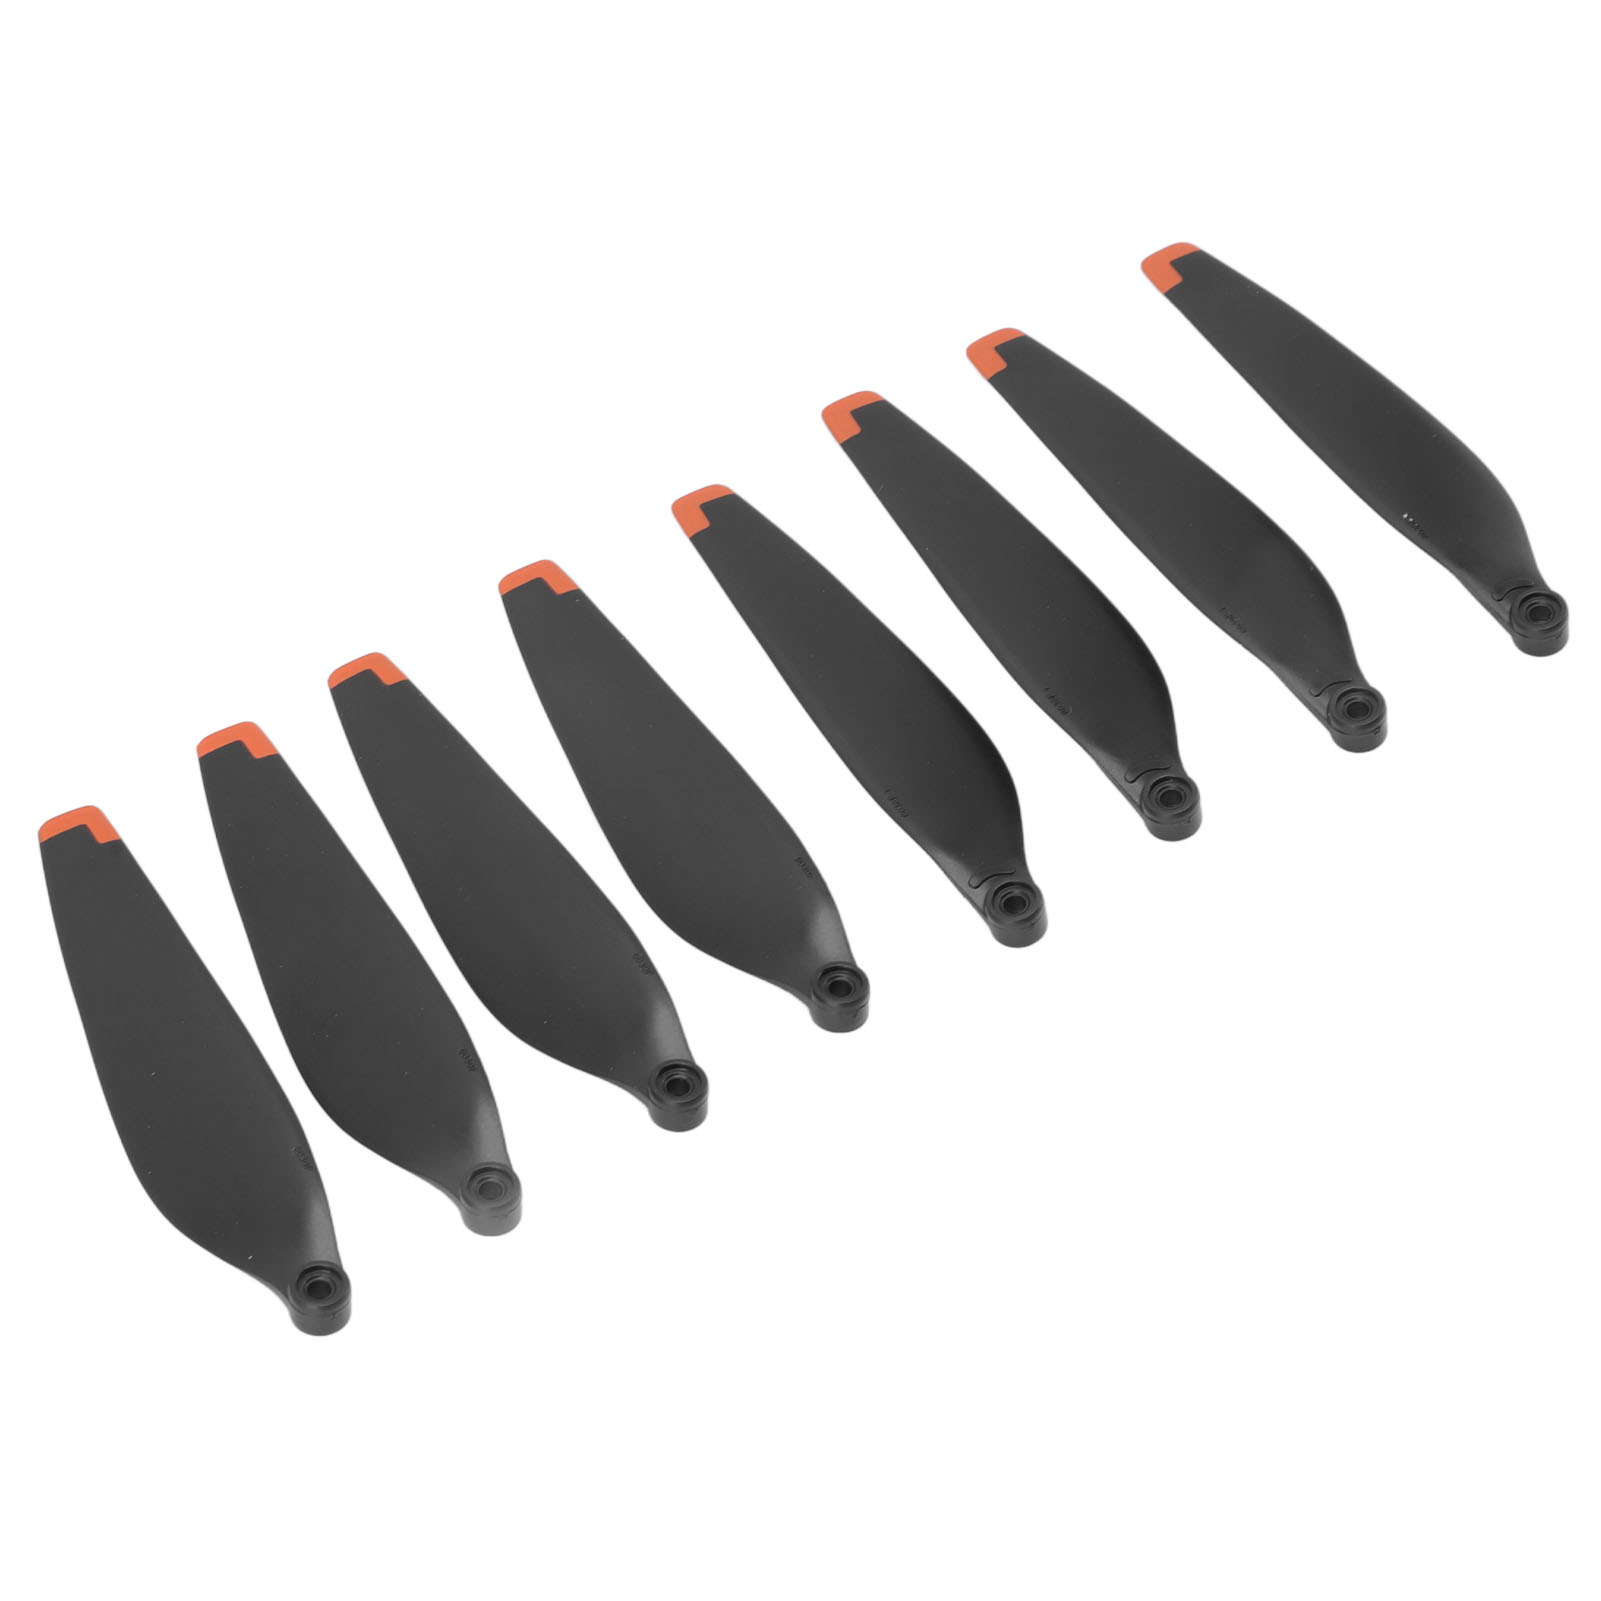 Low Noise Drone Propellers with Screwdriver